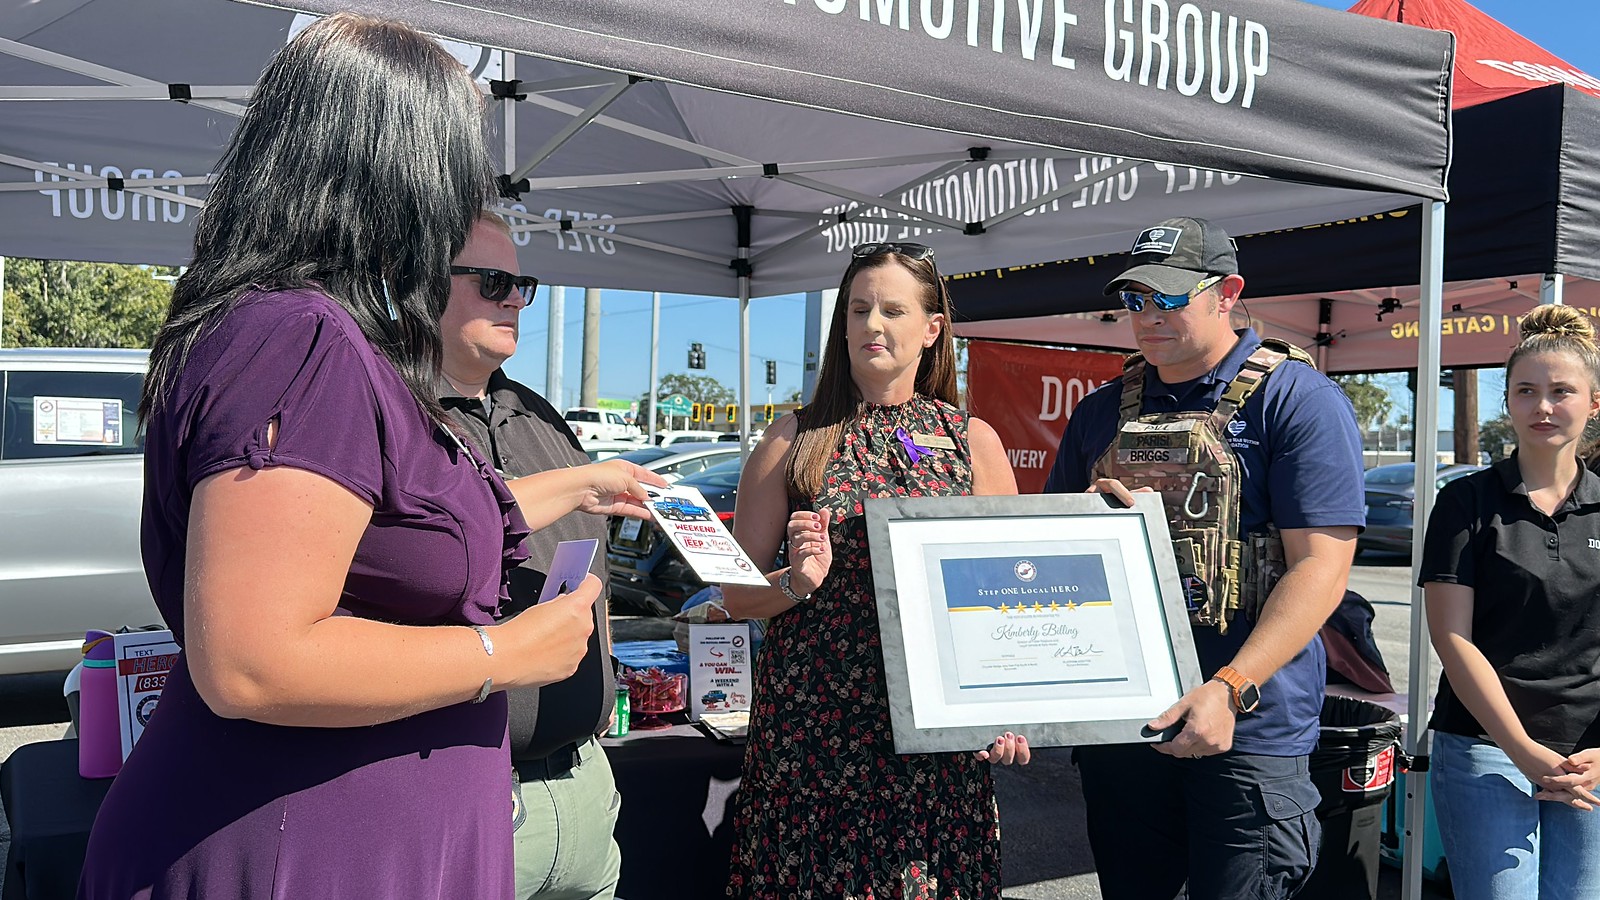 Step One Auto Presents Local Hero Award to Safe Haven’s Kimberly Billings